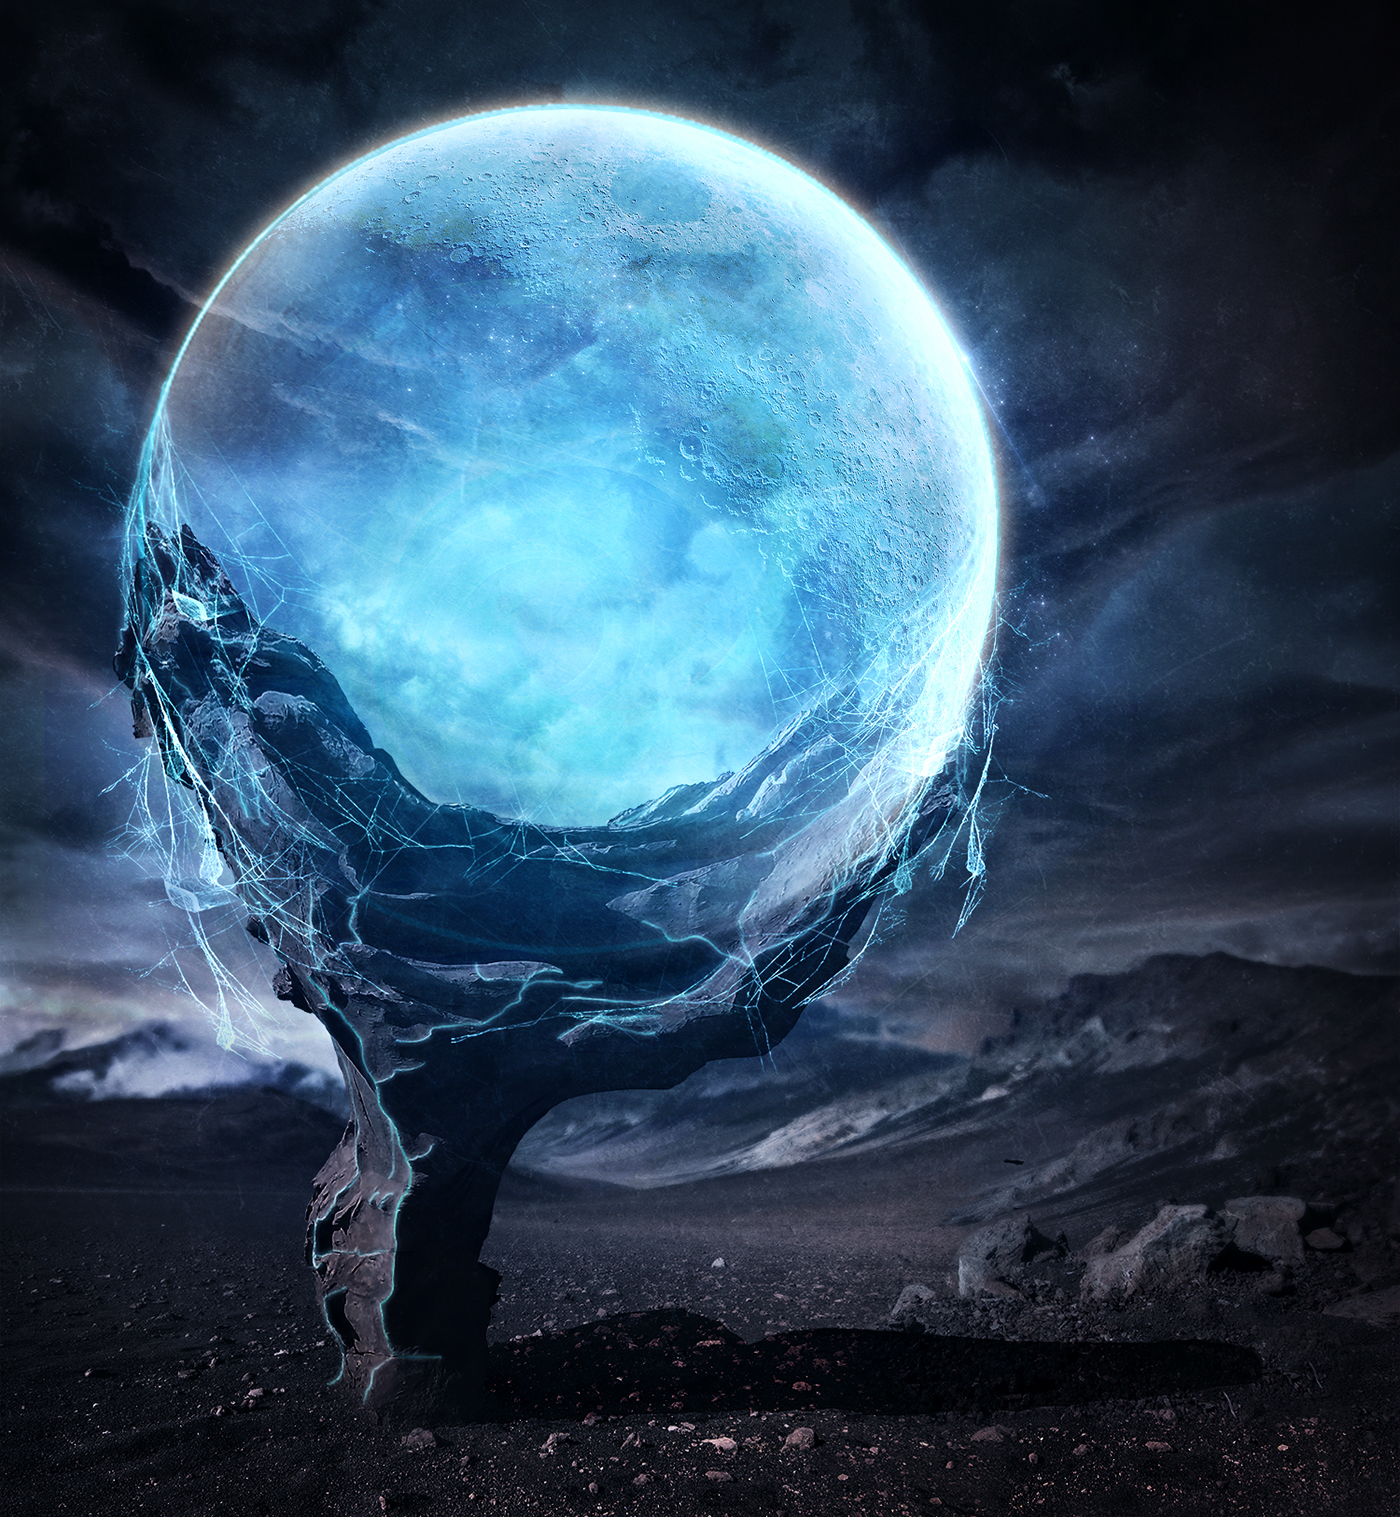 Scifi photomanipulation other world light orb universe book cover CD cover creation creators